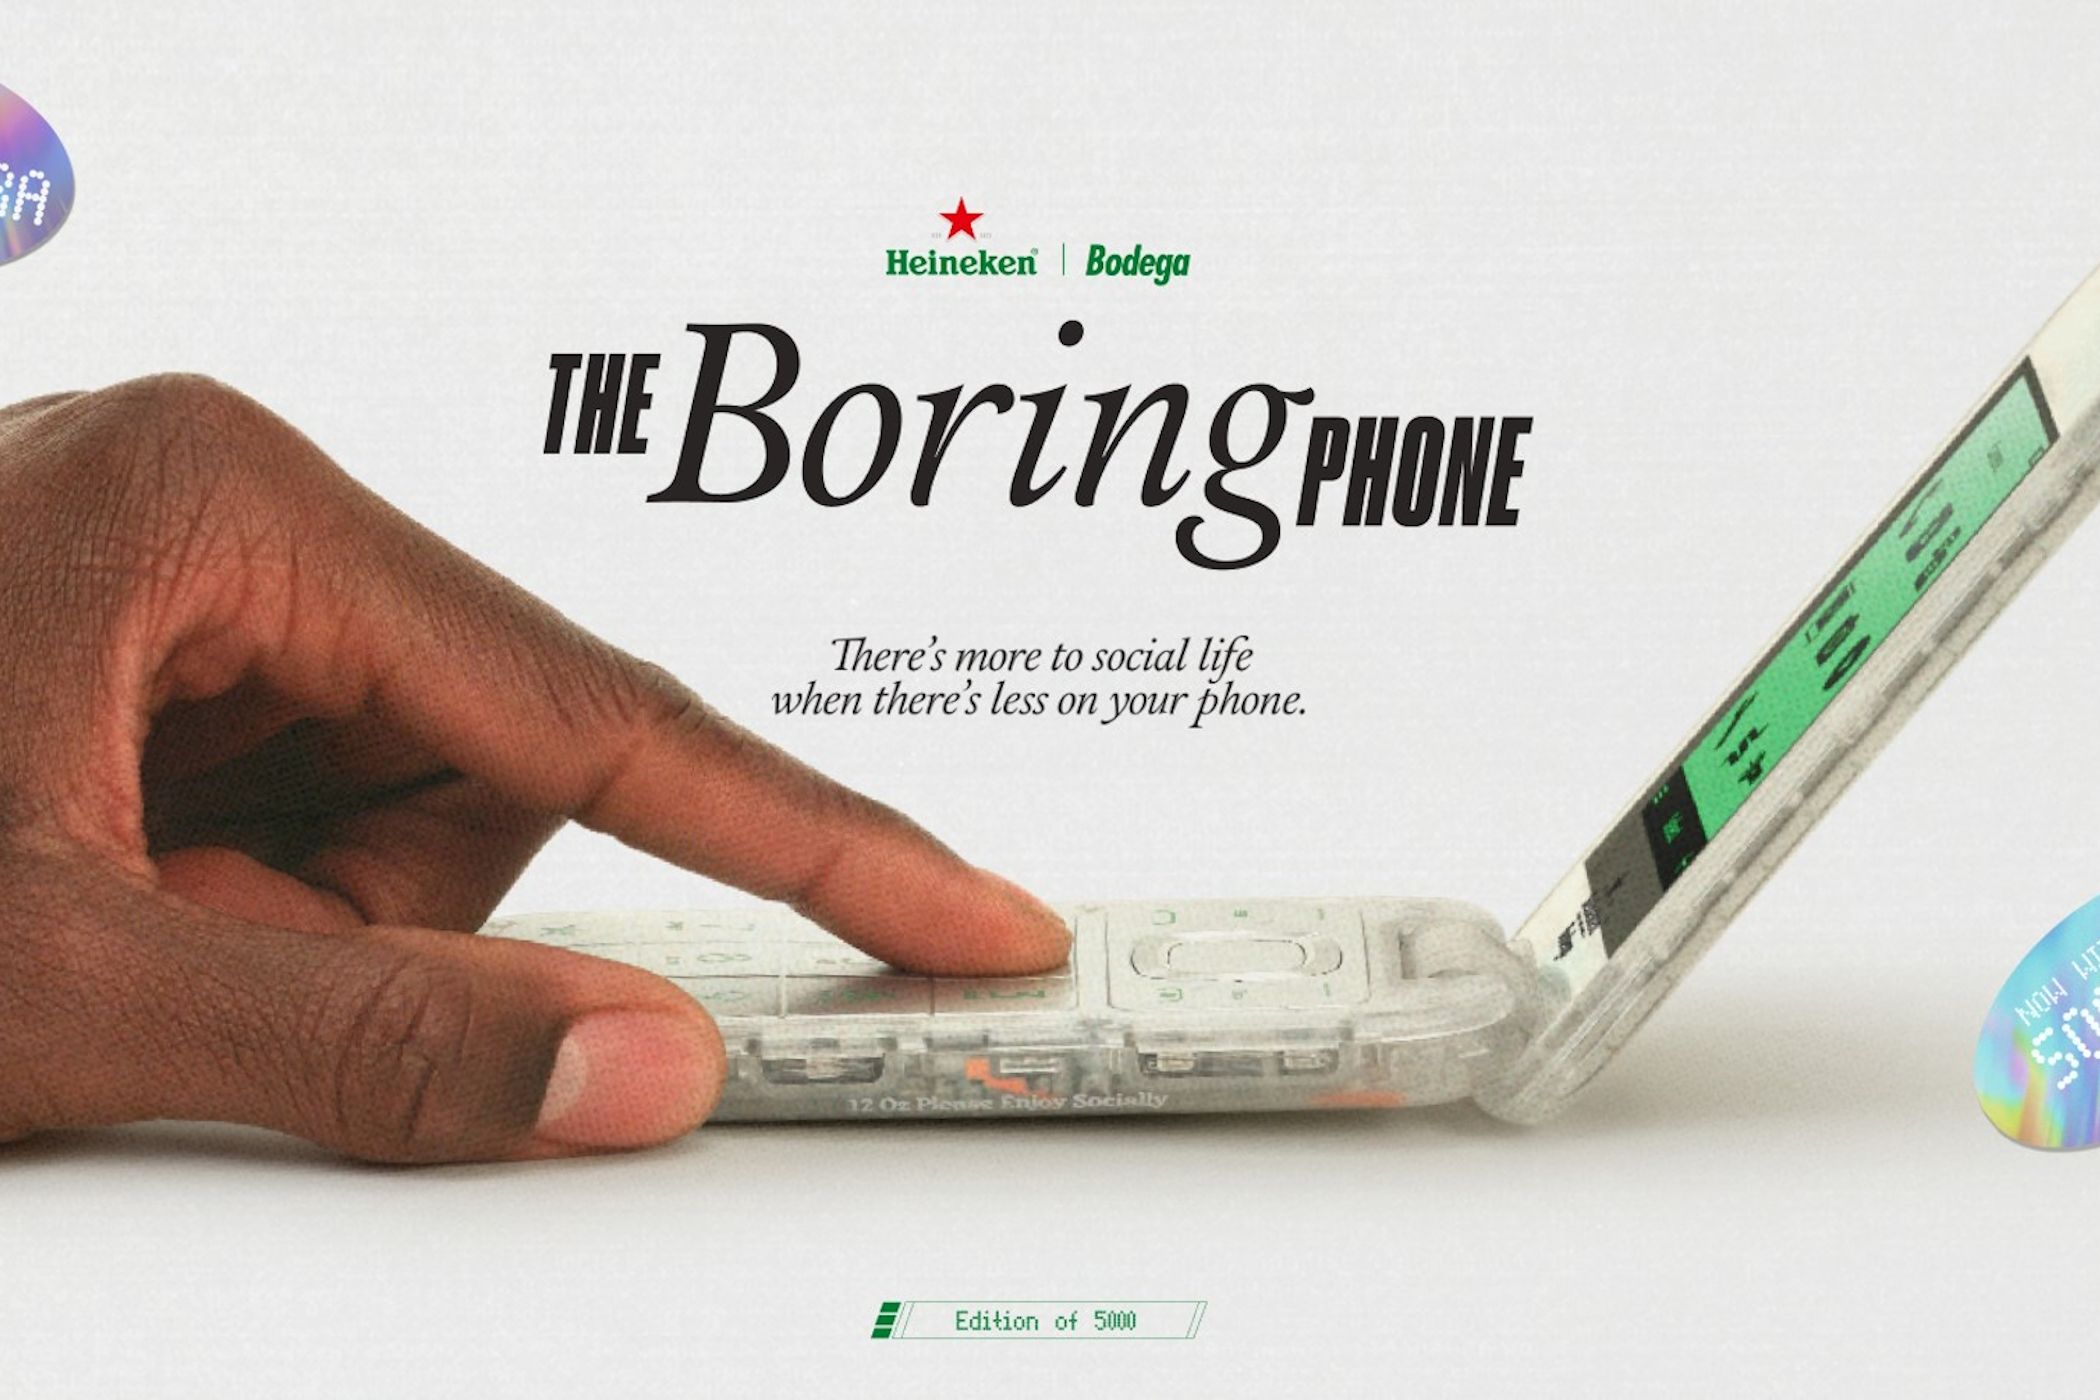 Heineken enters the smartphone world with a phone that's boring for all the right reasons